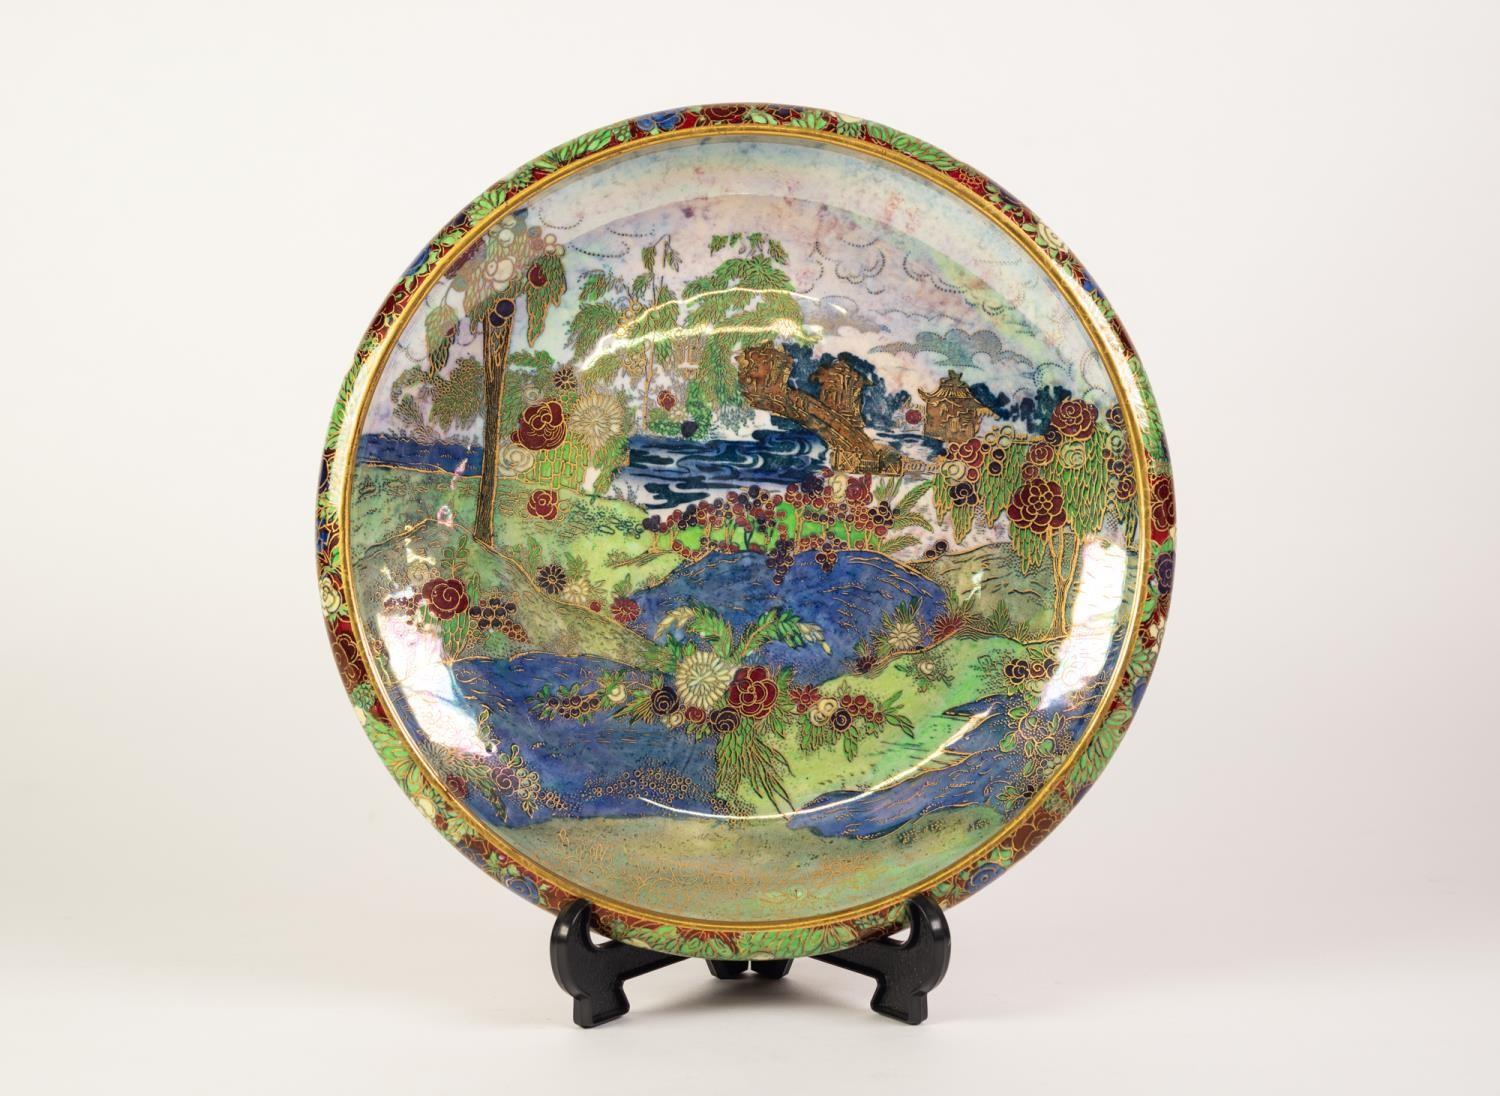 A 1930's A.G.H. JONES AND CO., WILTON WARE LUSTRE DECORATED POTTERY SHALLOW BOWL, with turned-in